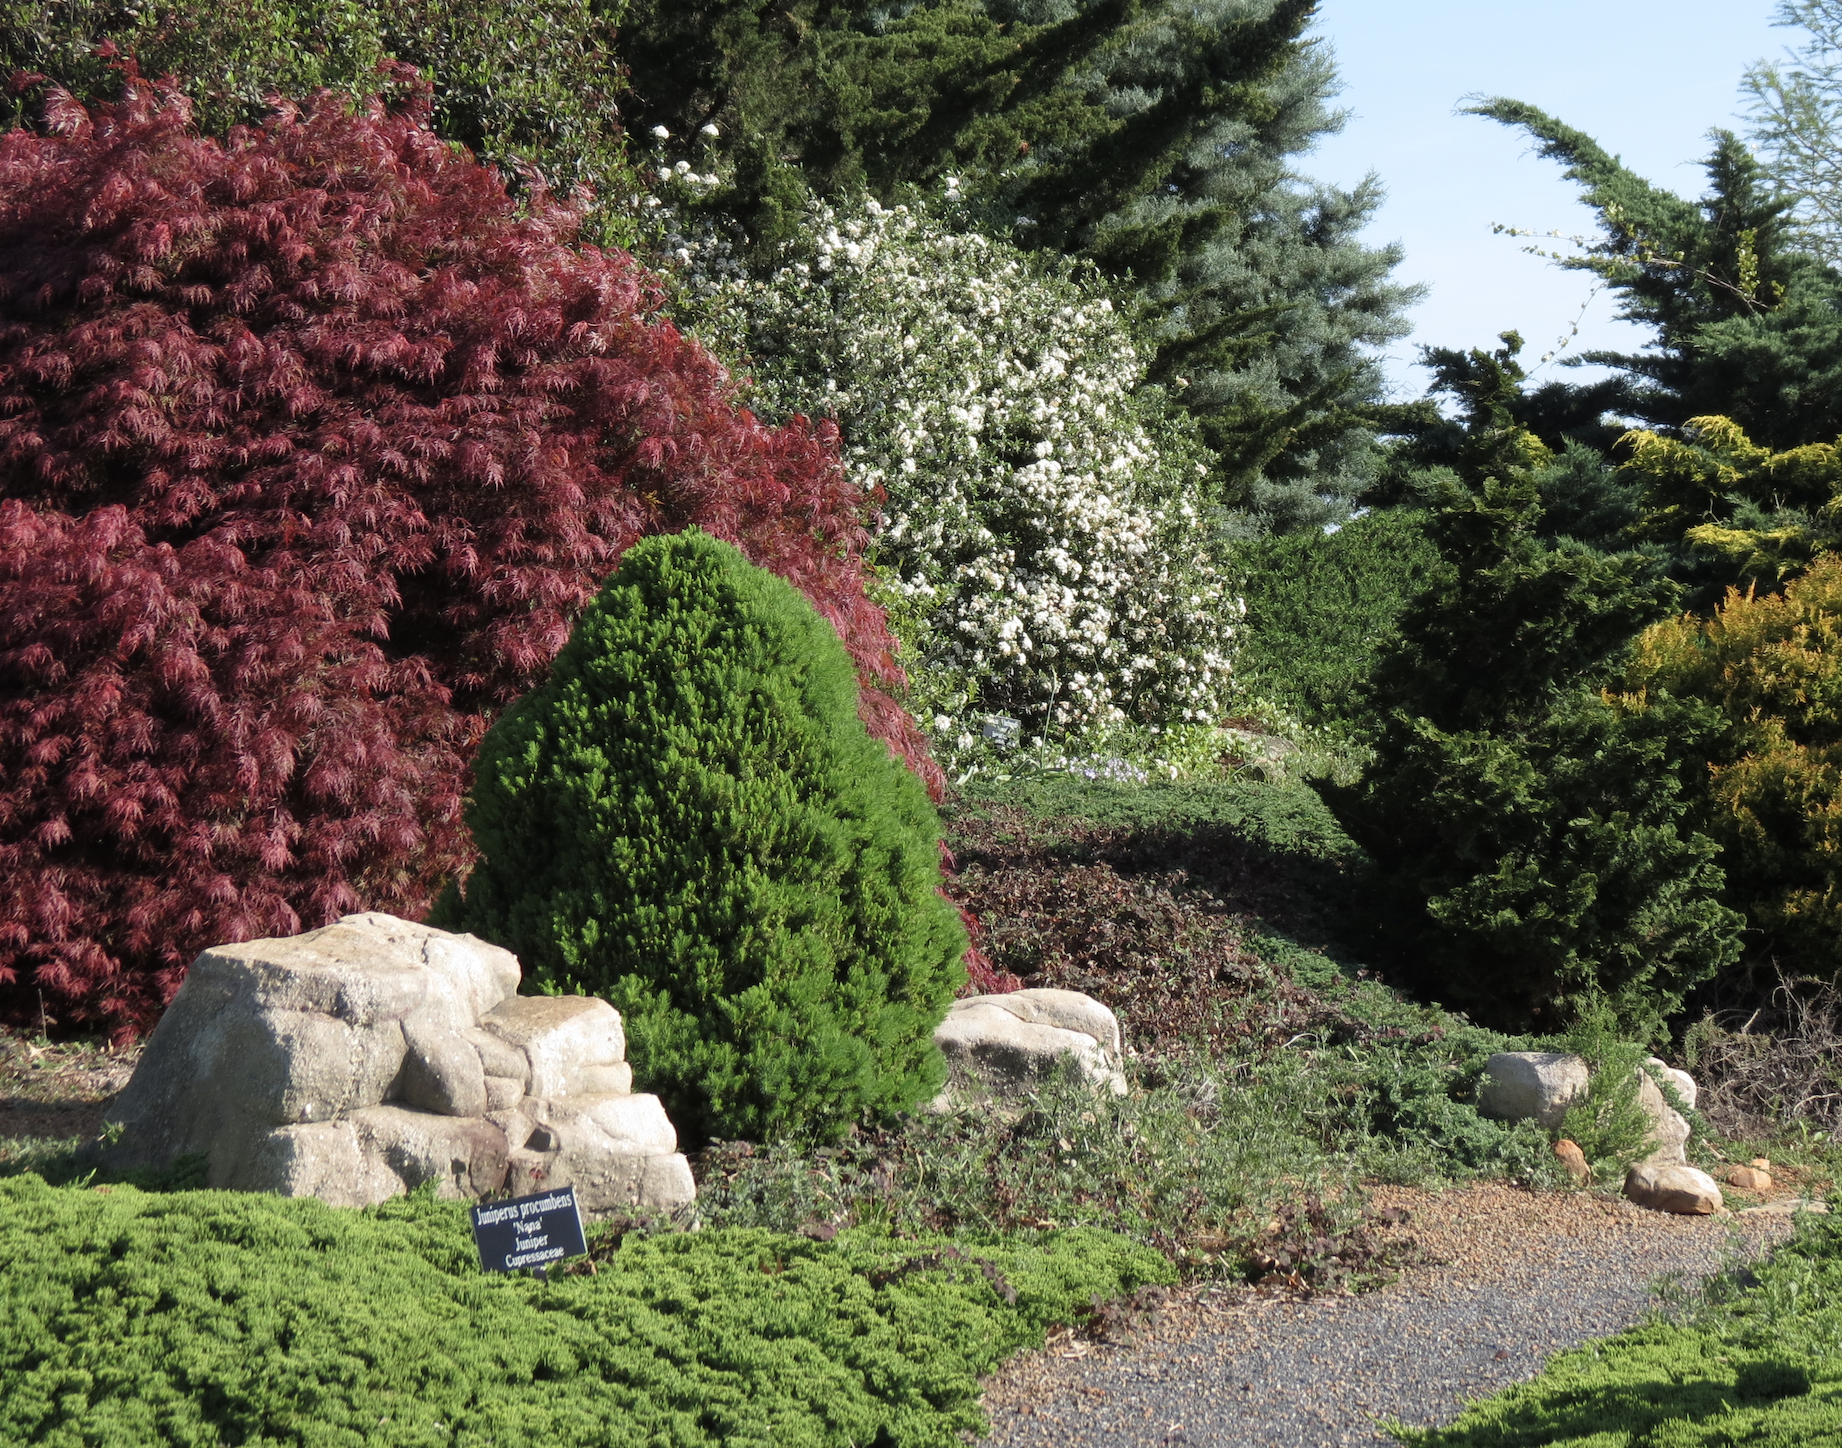 Evergreen and deciduous plants of different colors and forms can be used together to create a visually appealing landscape.